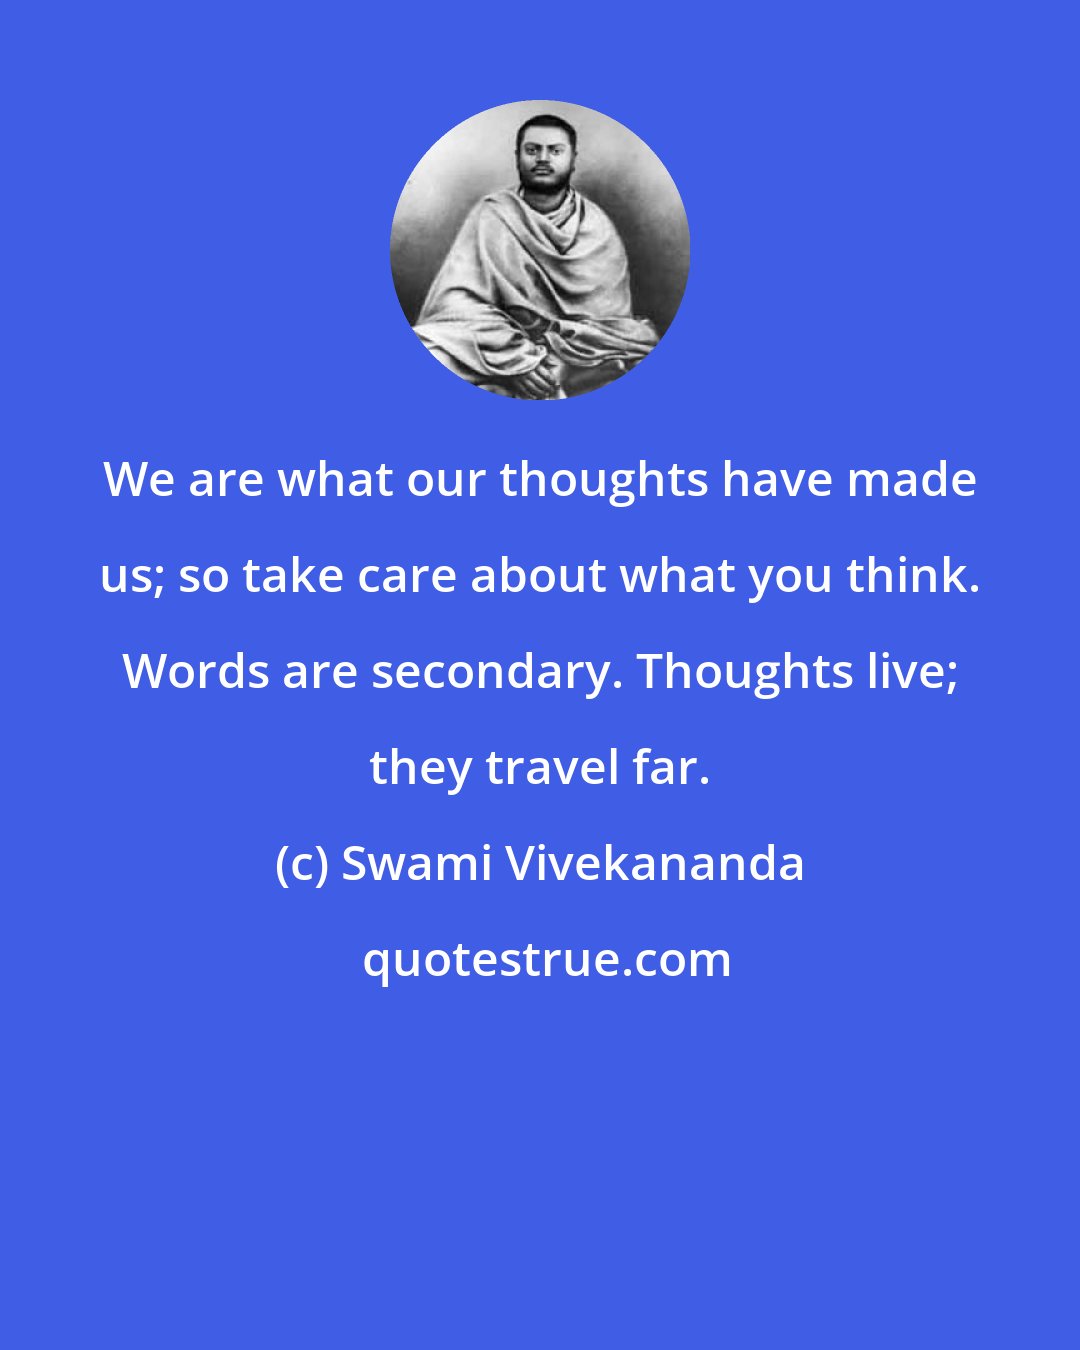 Swami Vivekananda: We are what our thoughts have made us; so take care about what you think. Words are secondary. Thoughts live; they travel far.